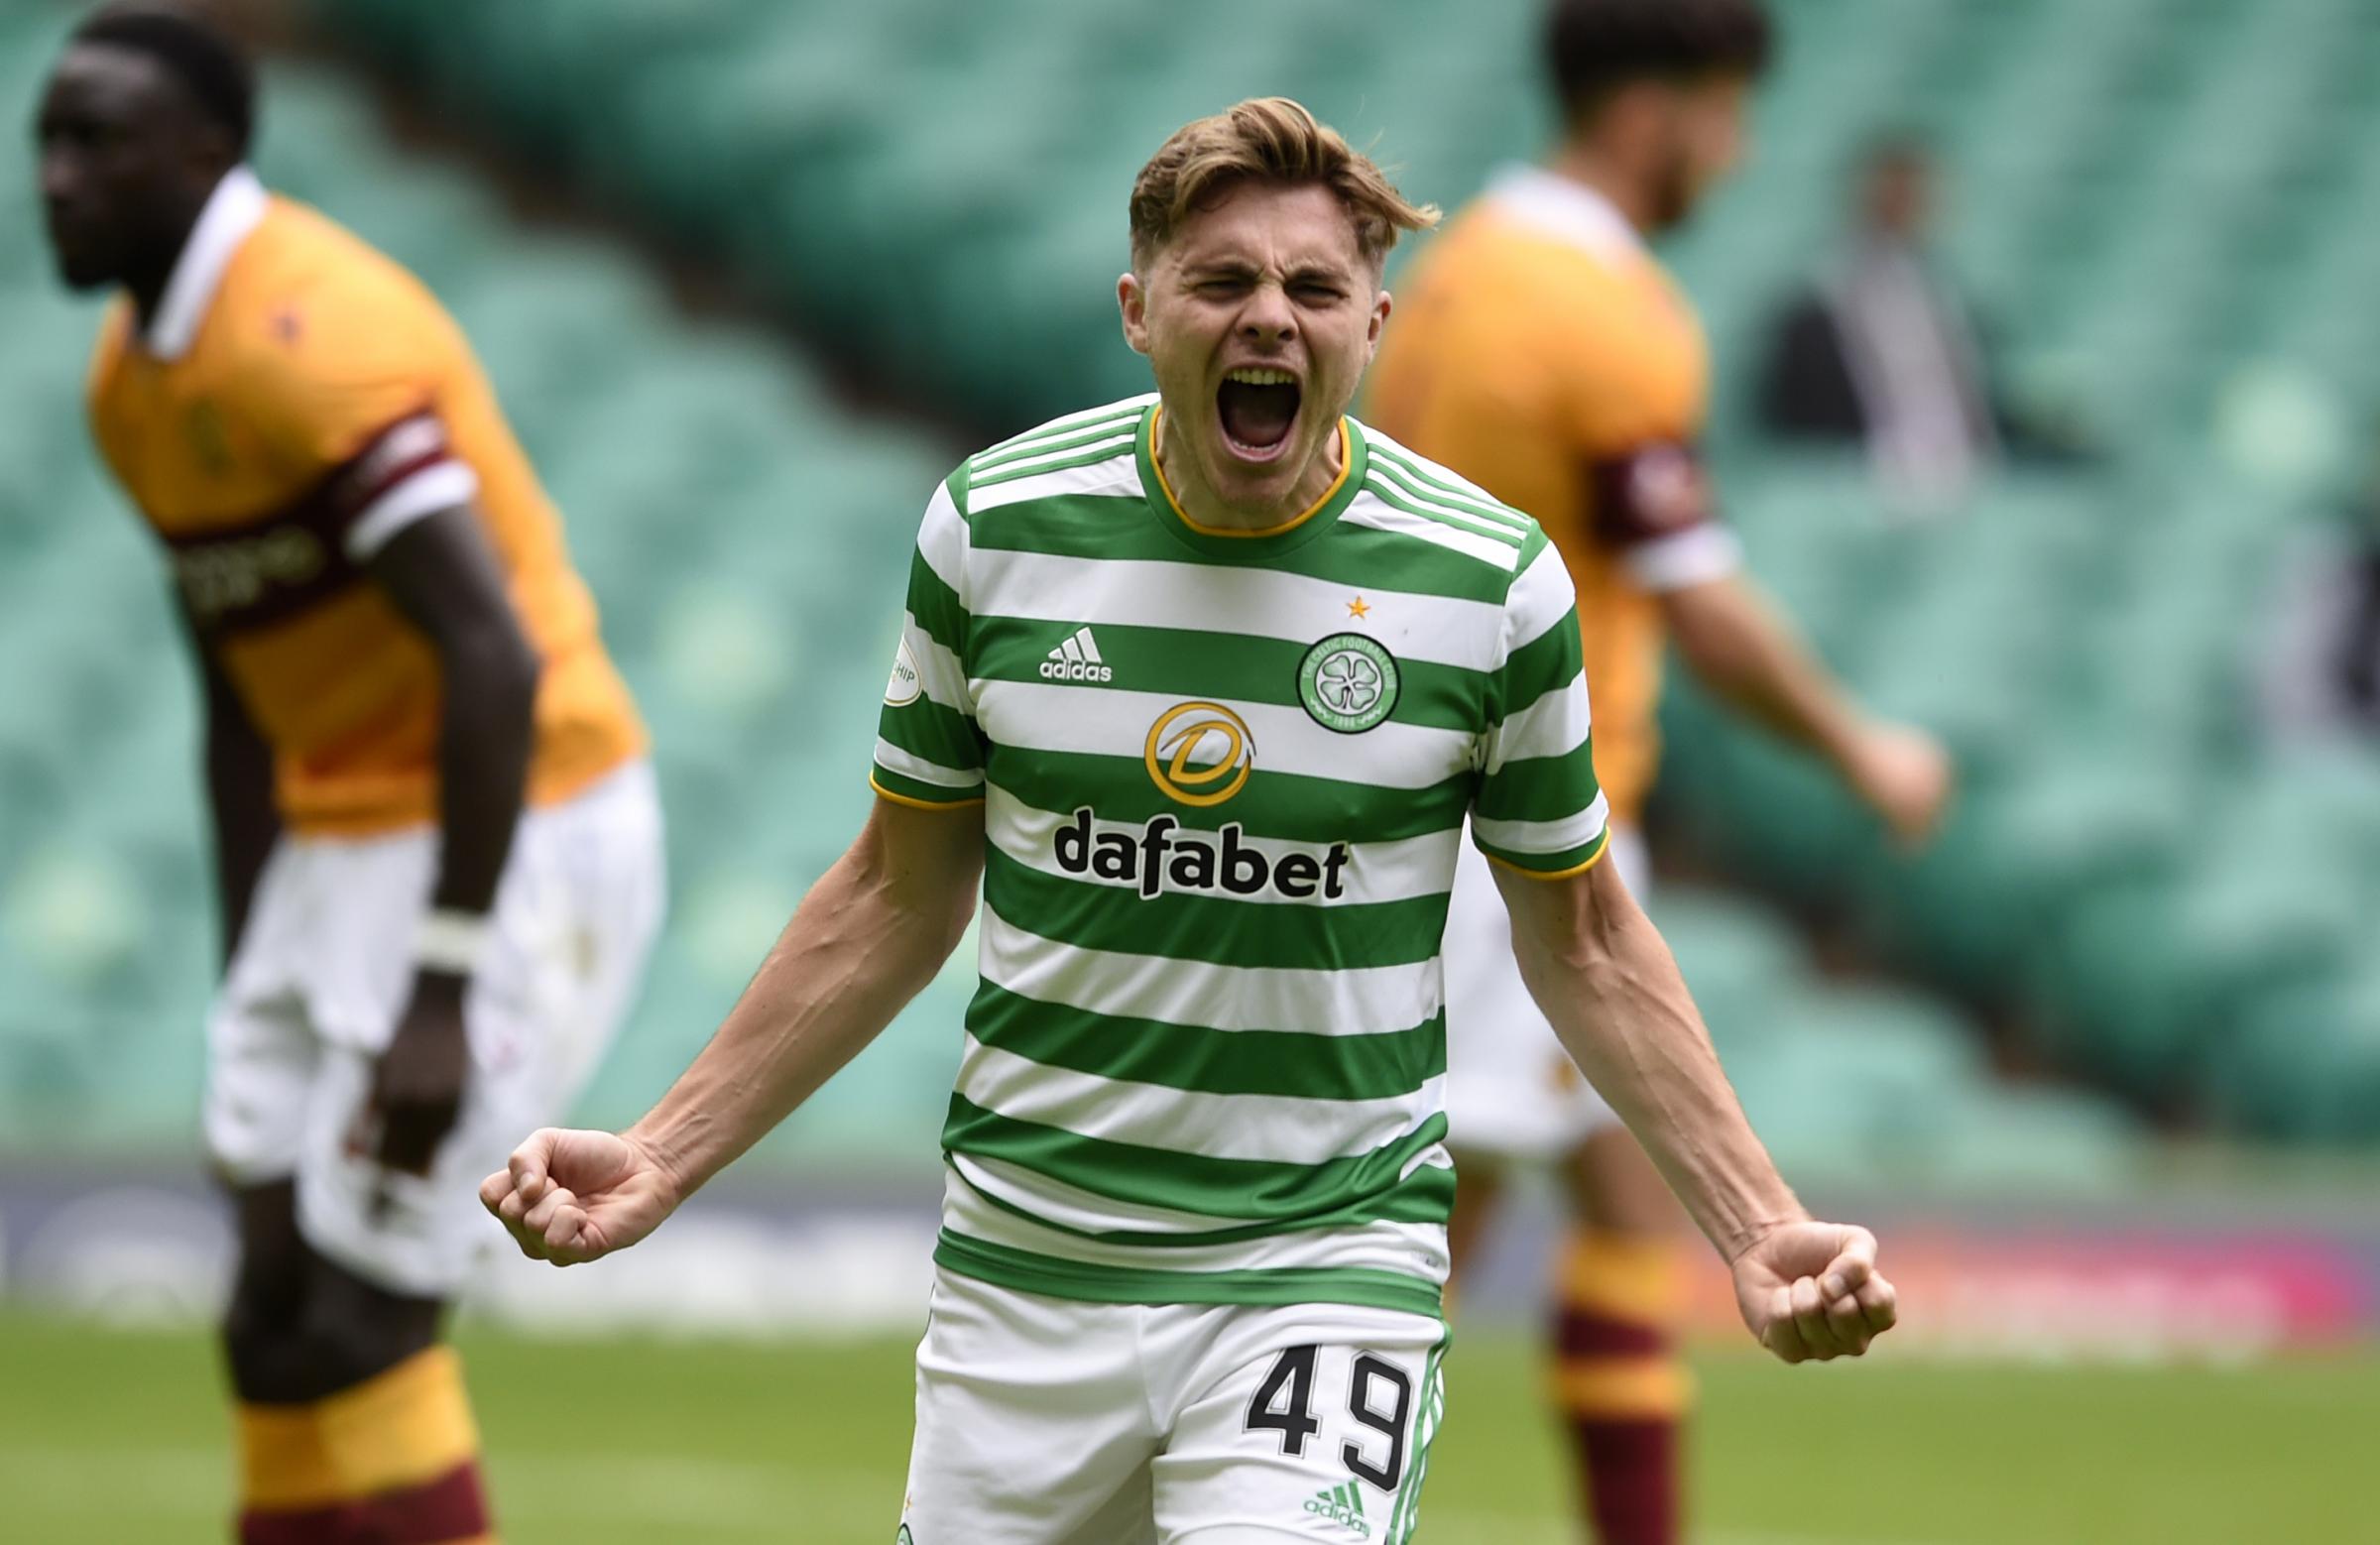 Celtic 3 Motherwell 0 LIVE: Neil Lennon's side bounce back from Champions League defeat with comfortable win